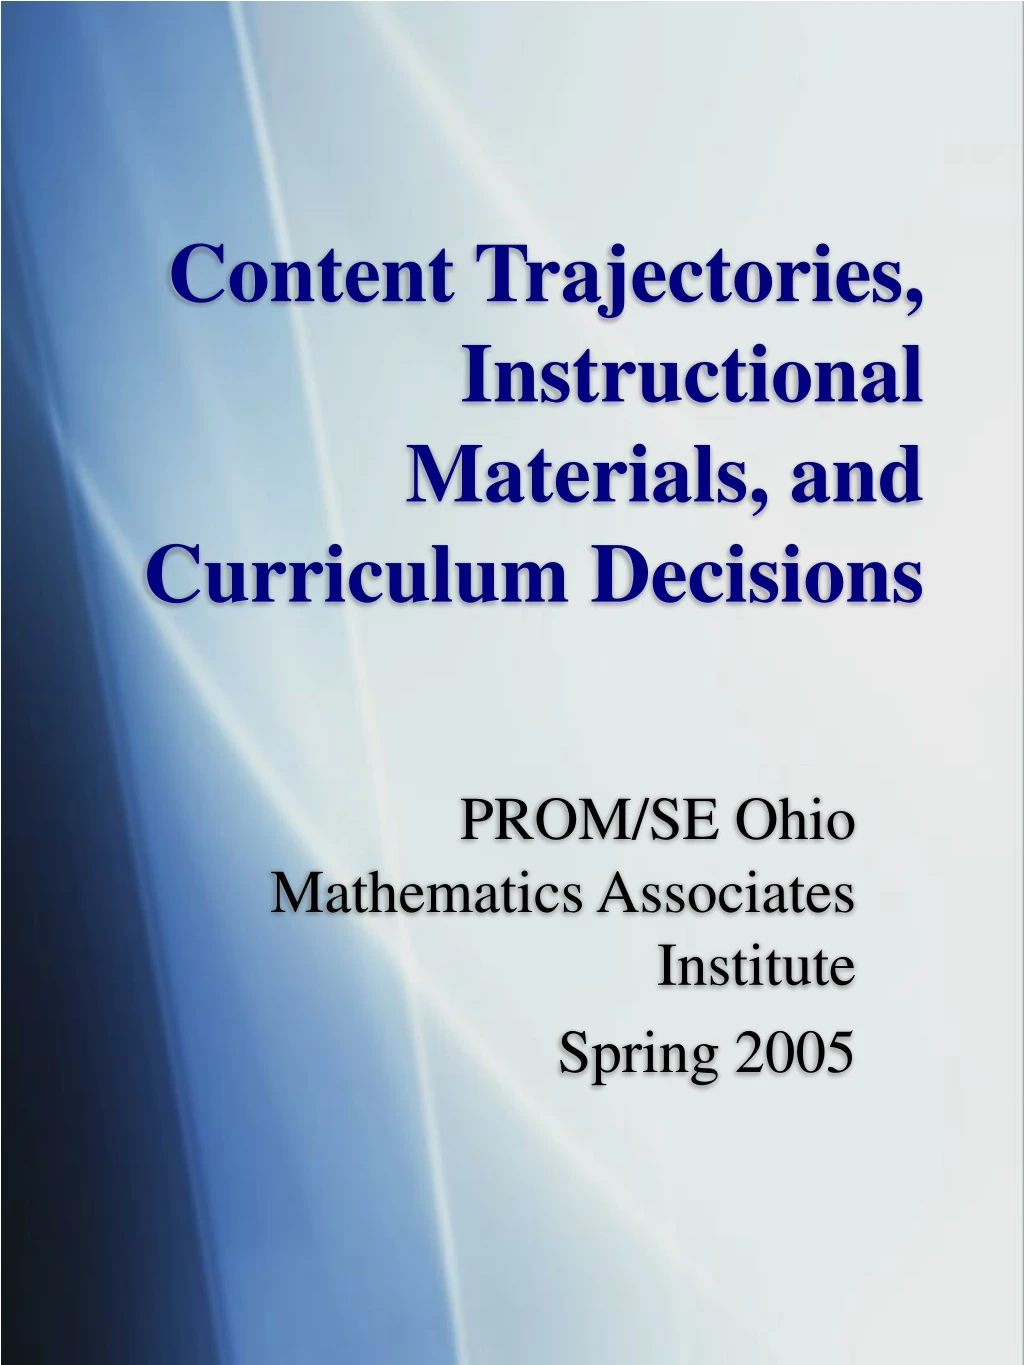 content trajectories instructional materials and curriculum decisions